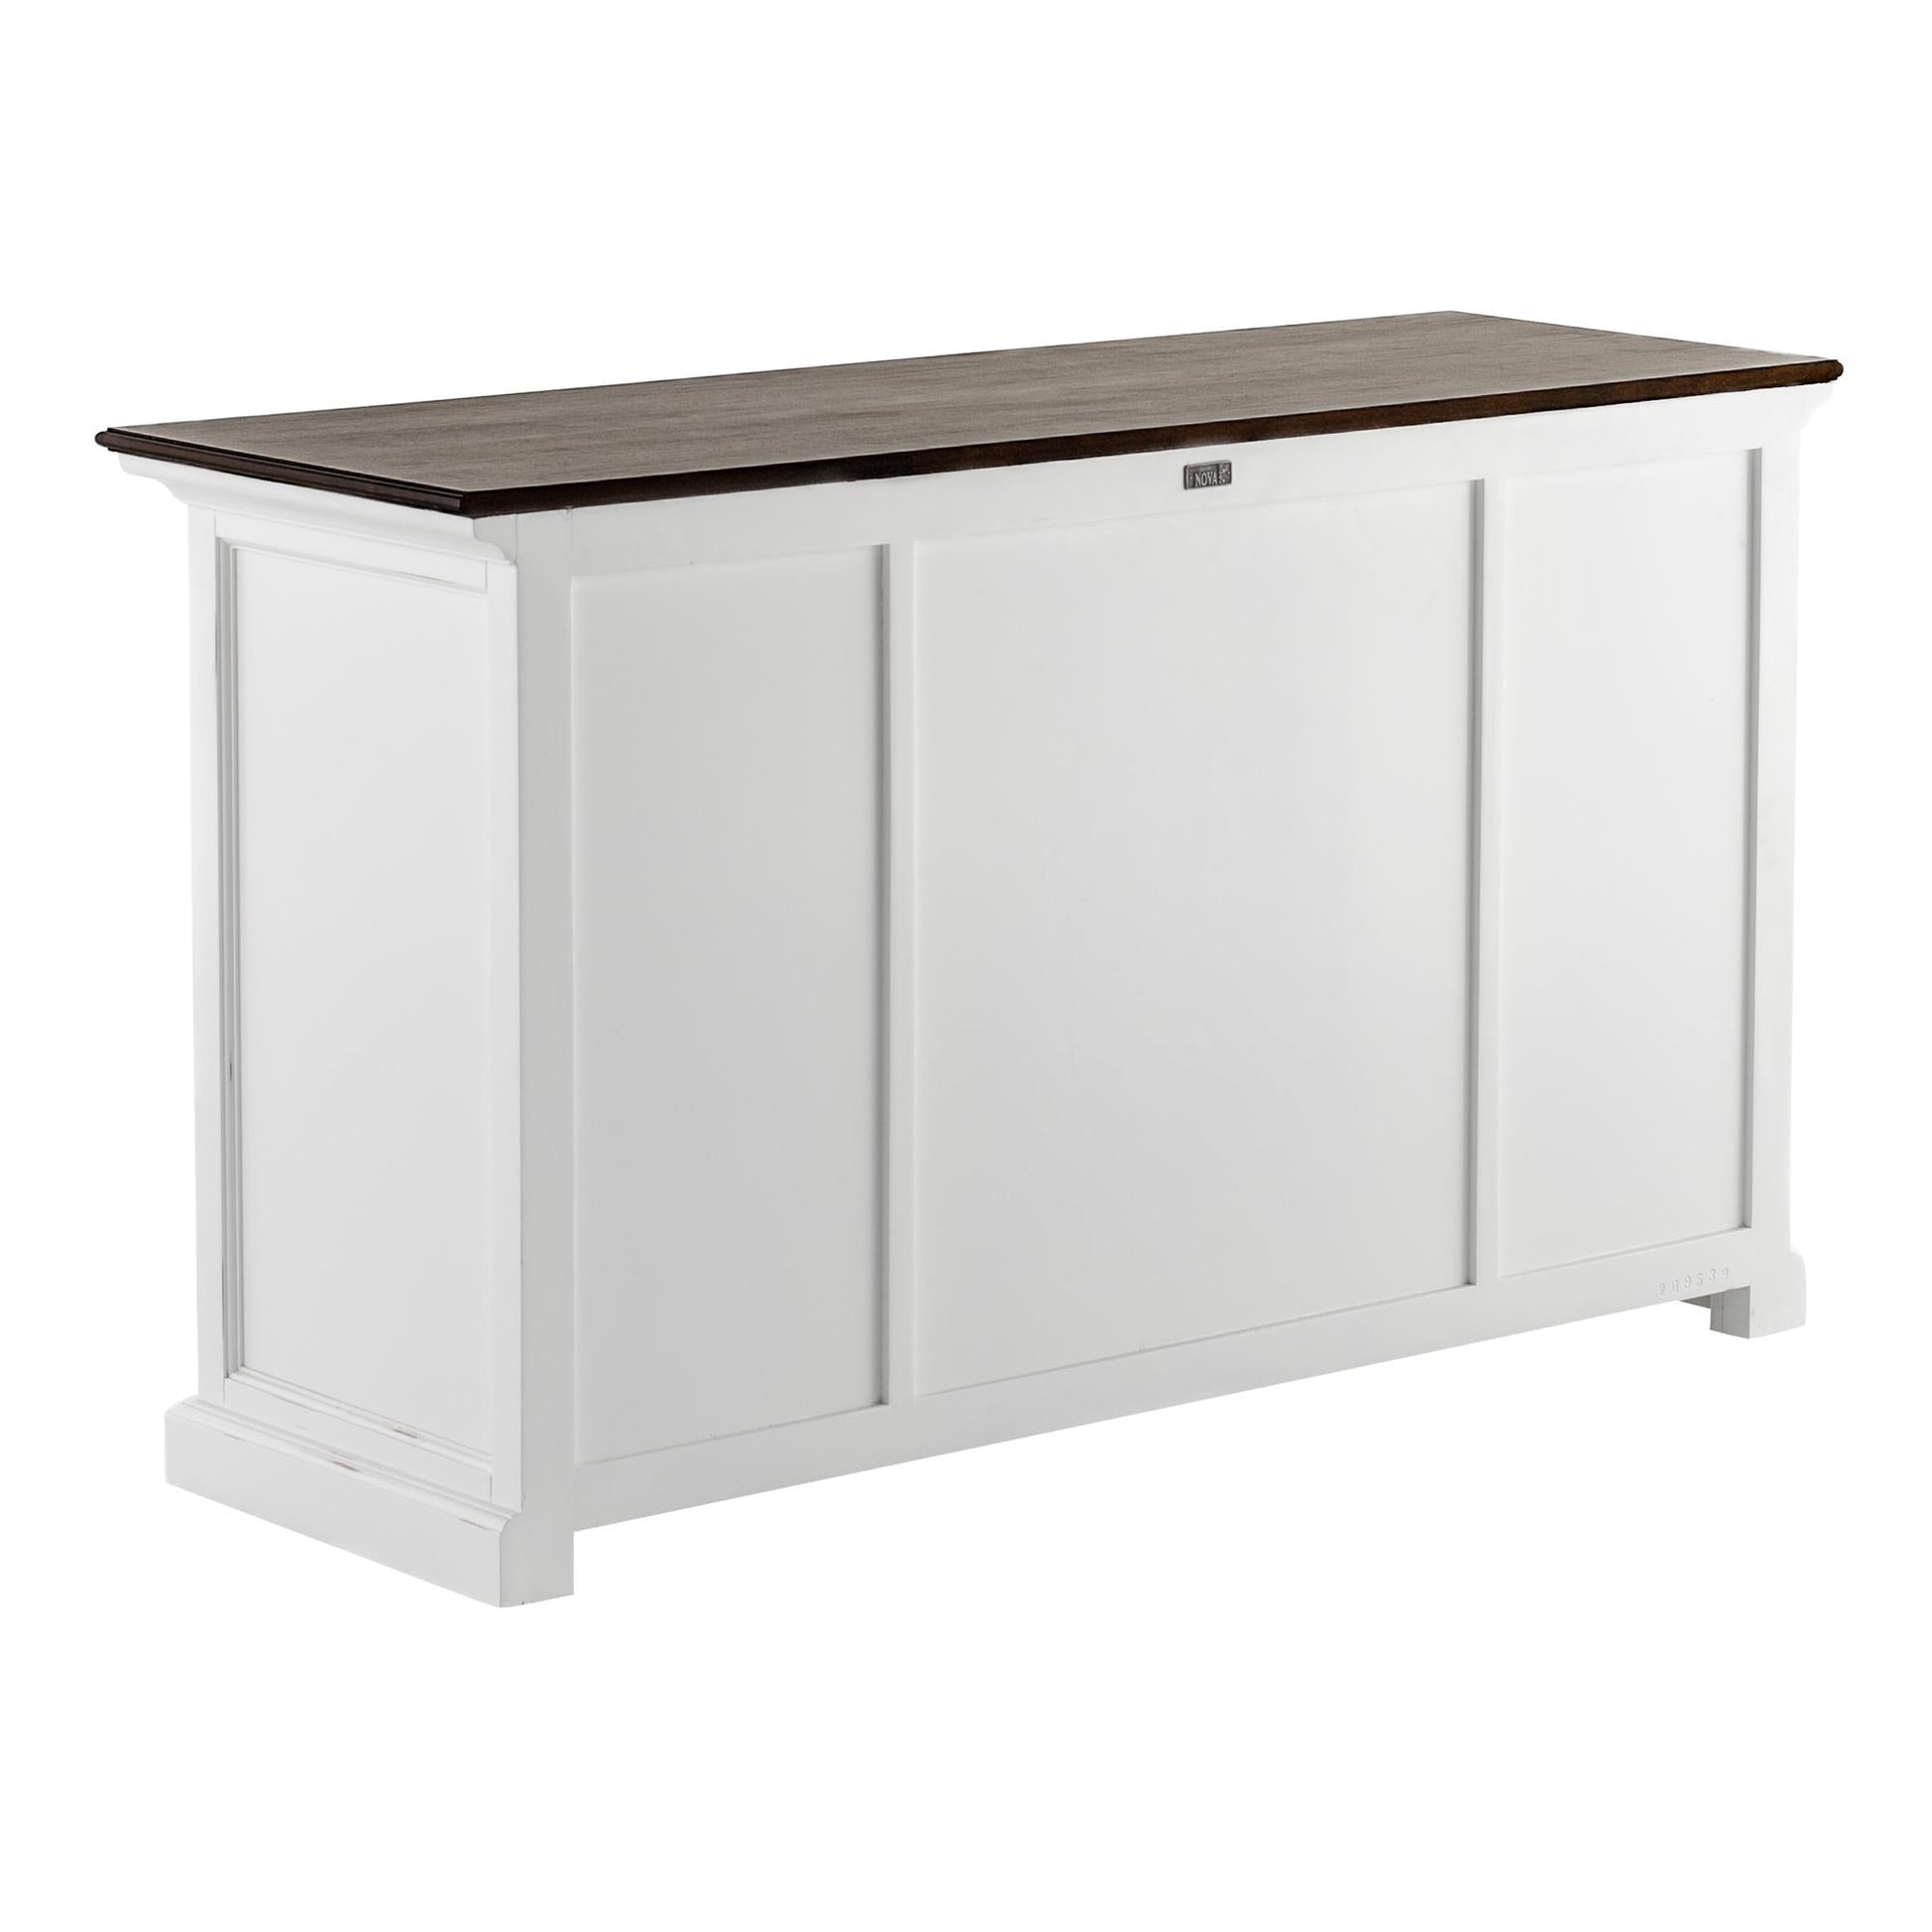 NovaSolo Halifax Accent 57" Classic White & Brown Mahogany Buffet With 2 Glass/ Wooden Doors & 3 Drawers